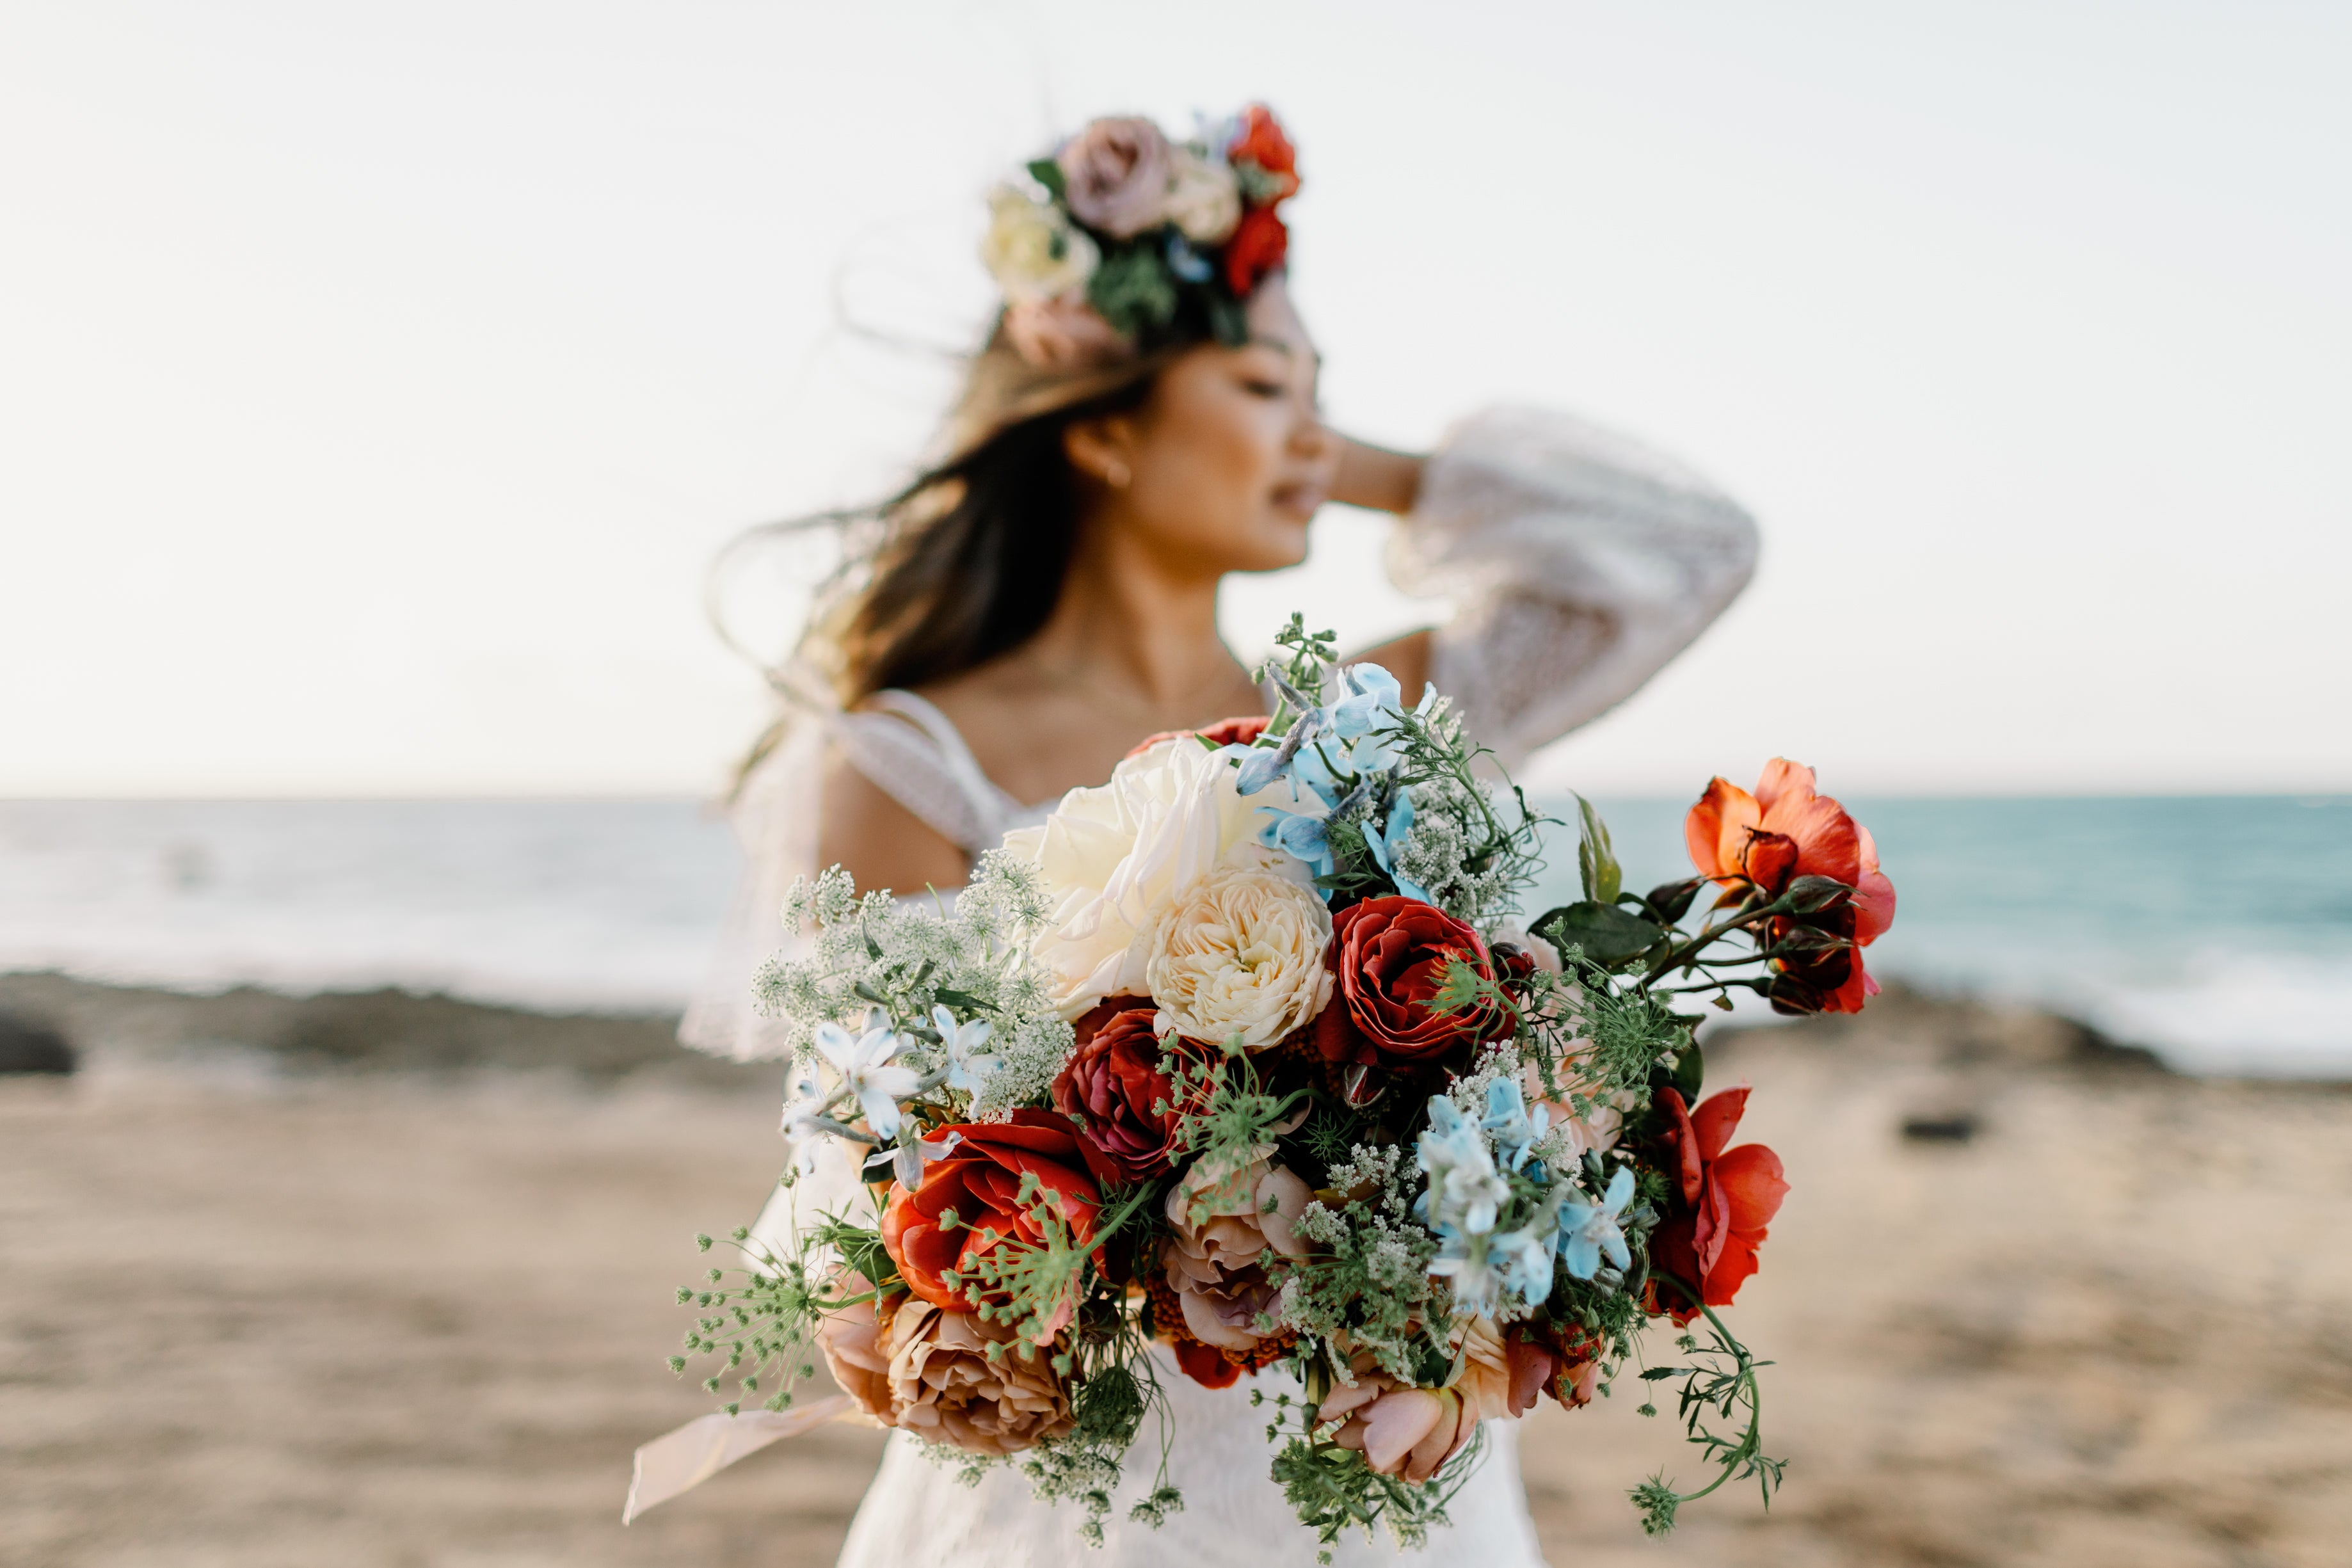 Model wearing heirloom rose headpiece and carrying a garden rose bouquet on the beach